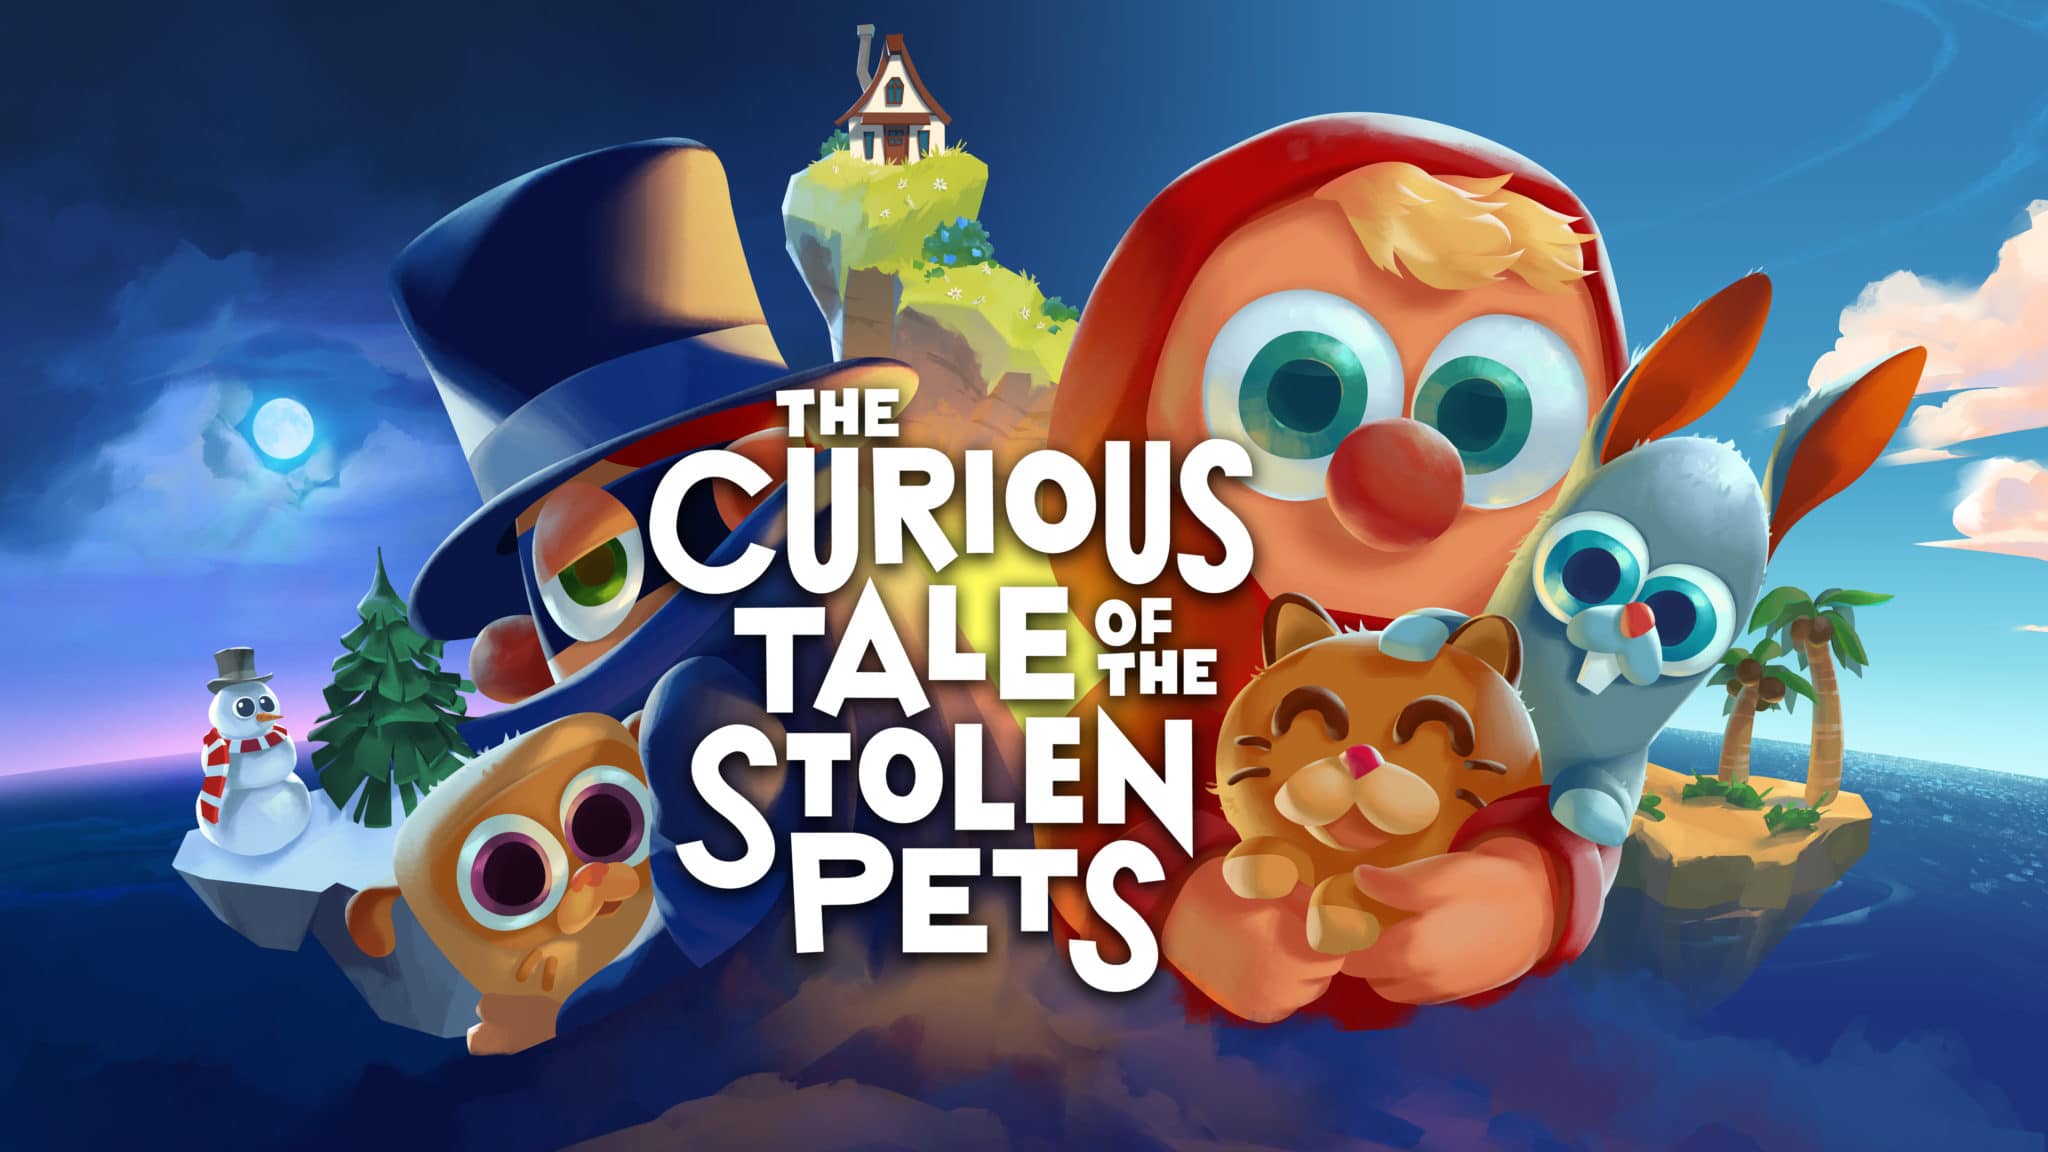 Presentato The Curious Tale of the Stolen Pets 4